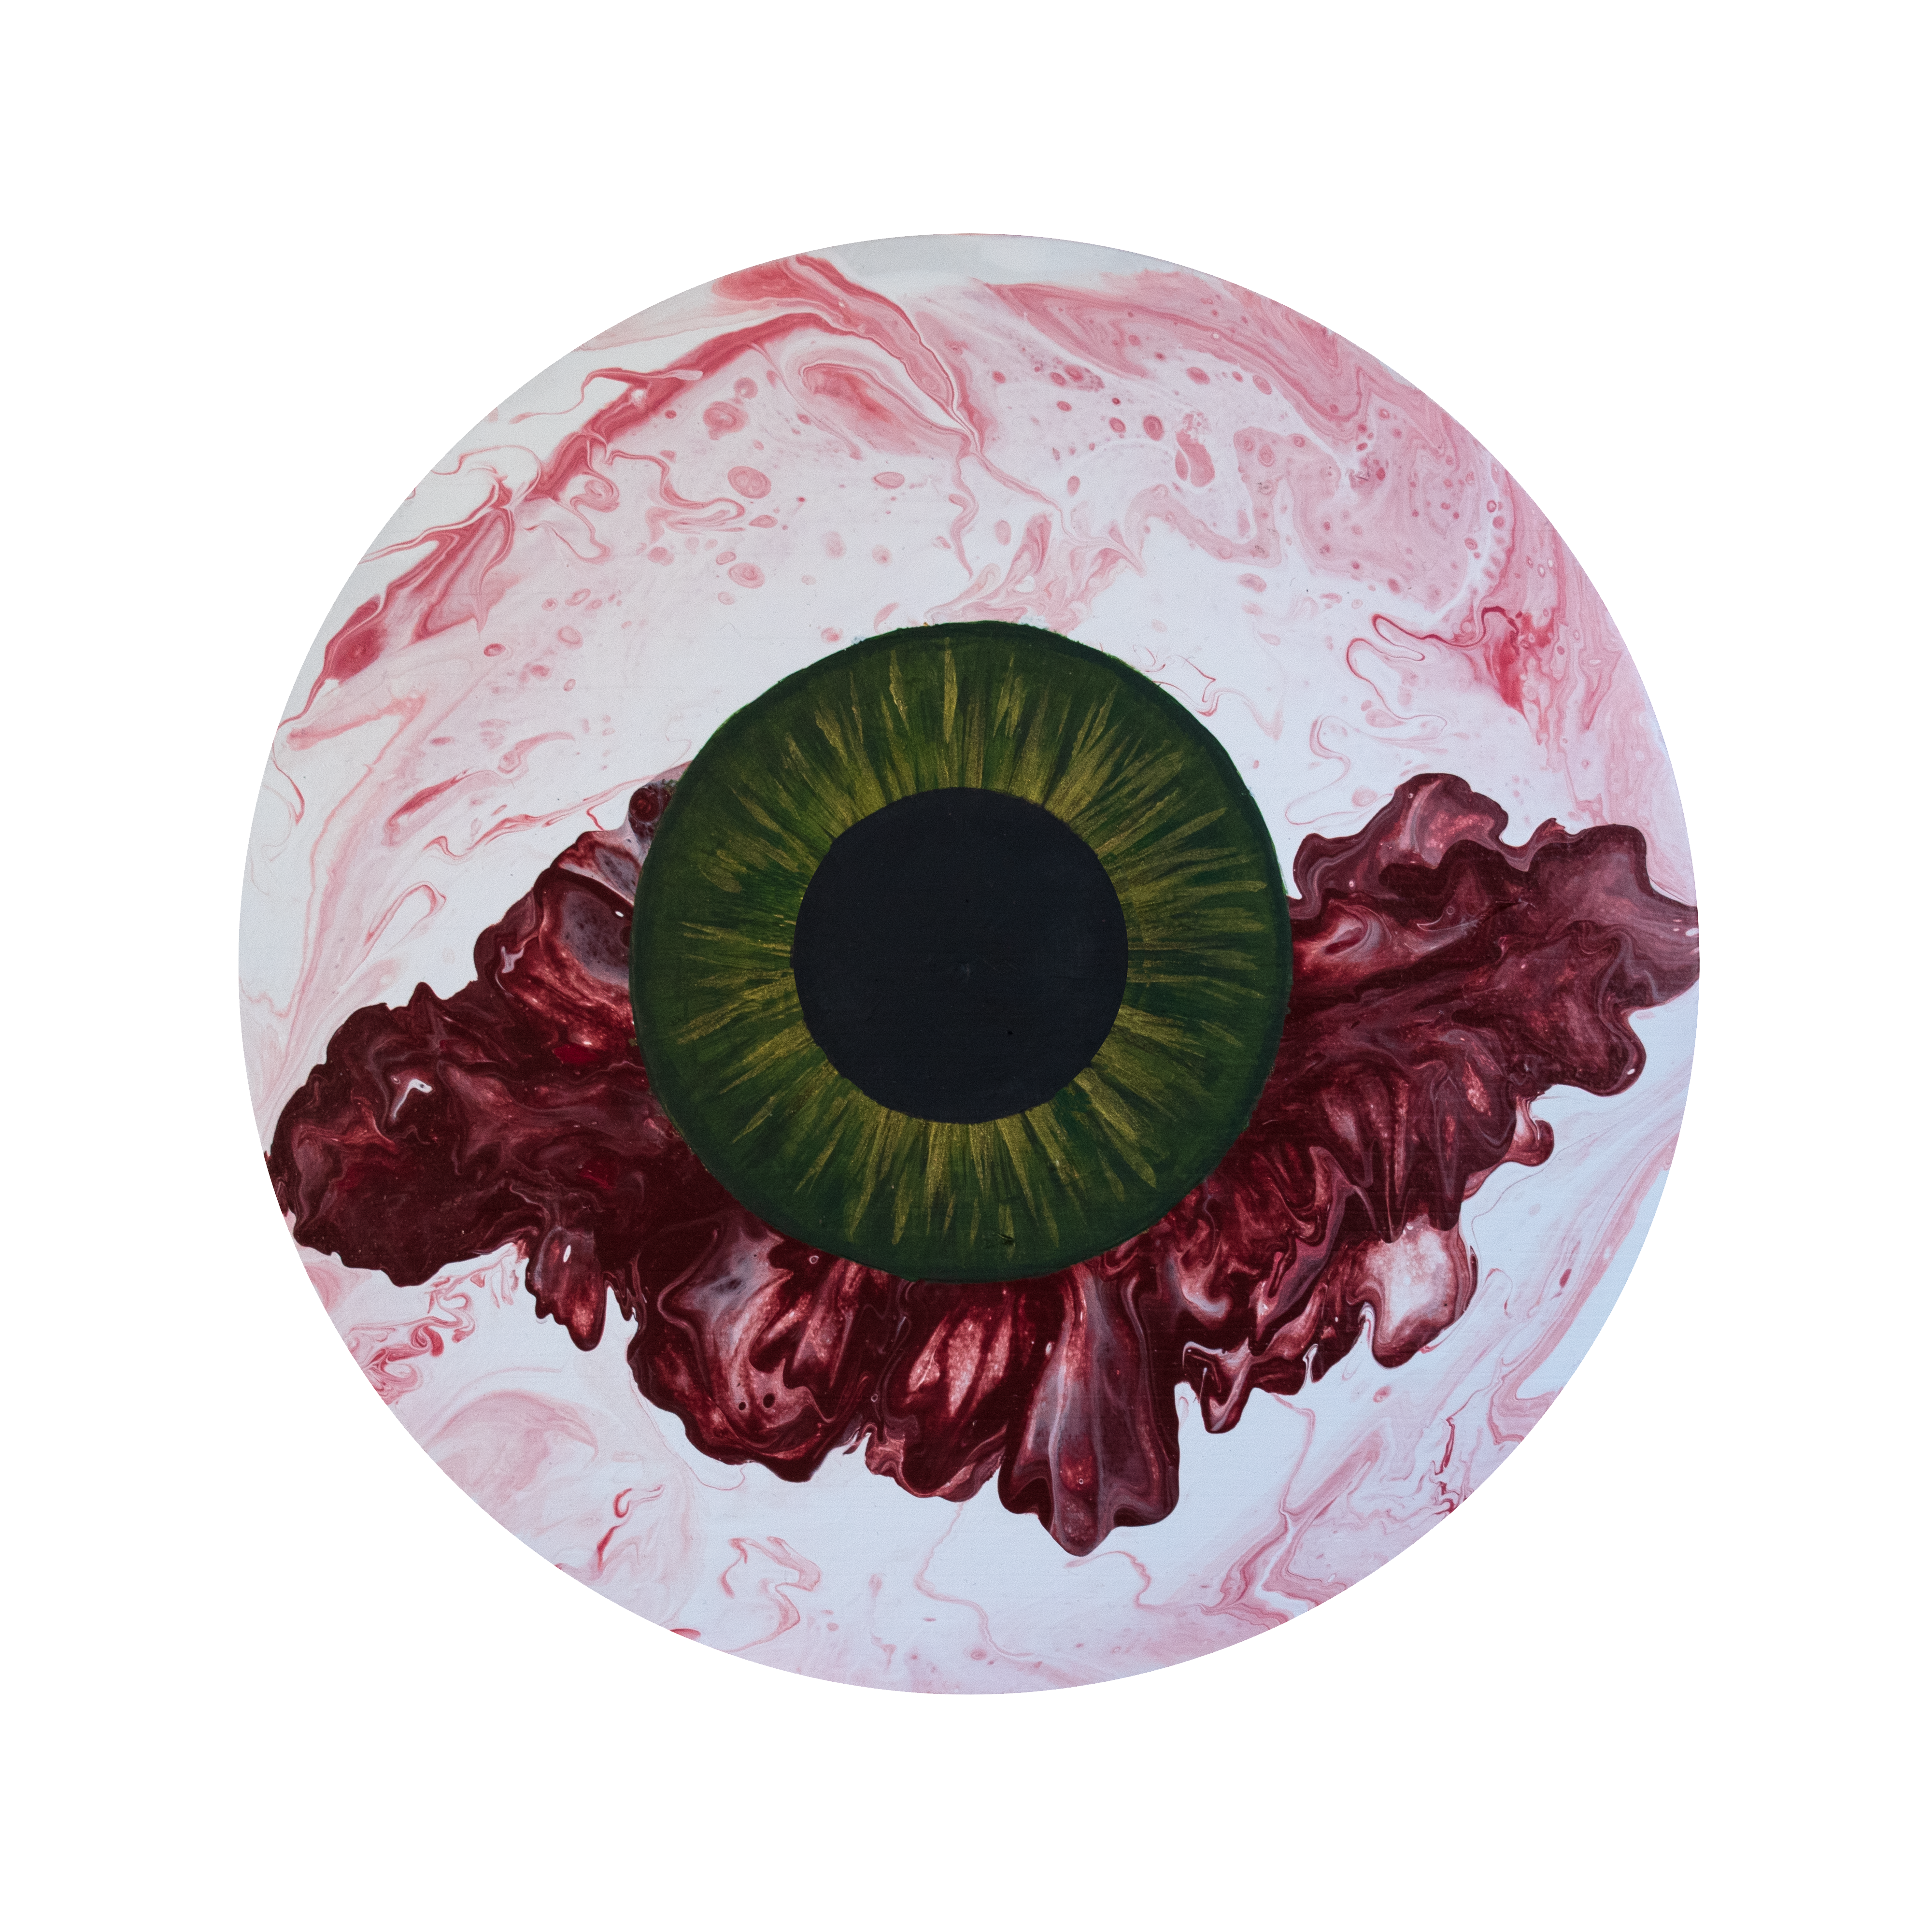 Colorful poured painting on wood disc of a human eye with black spot